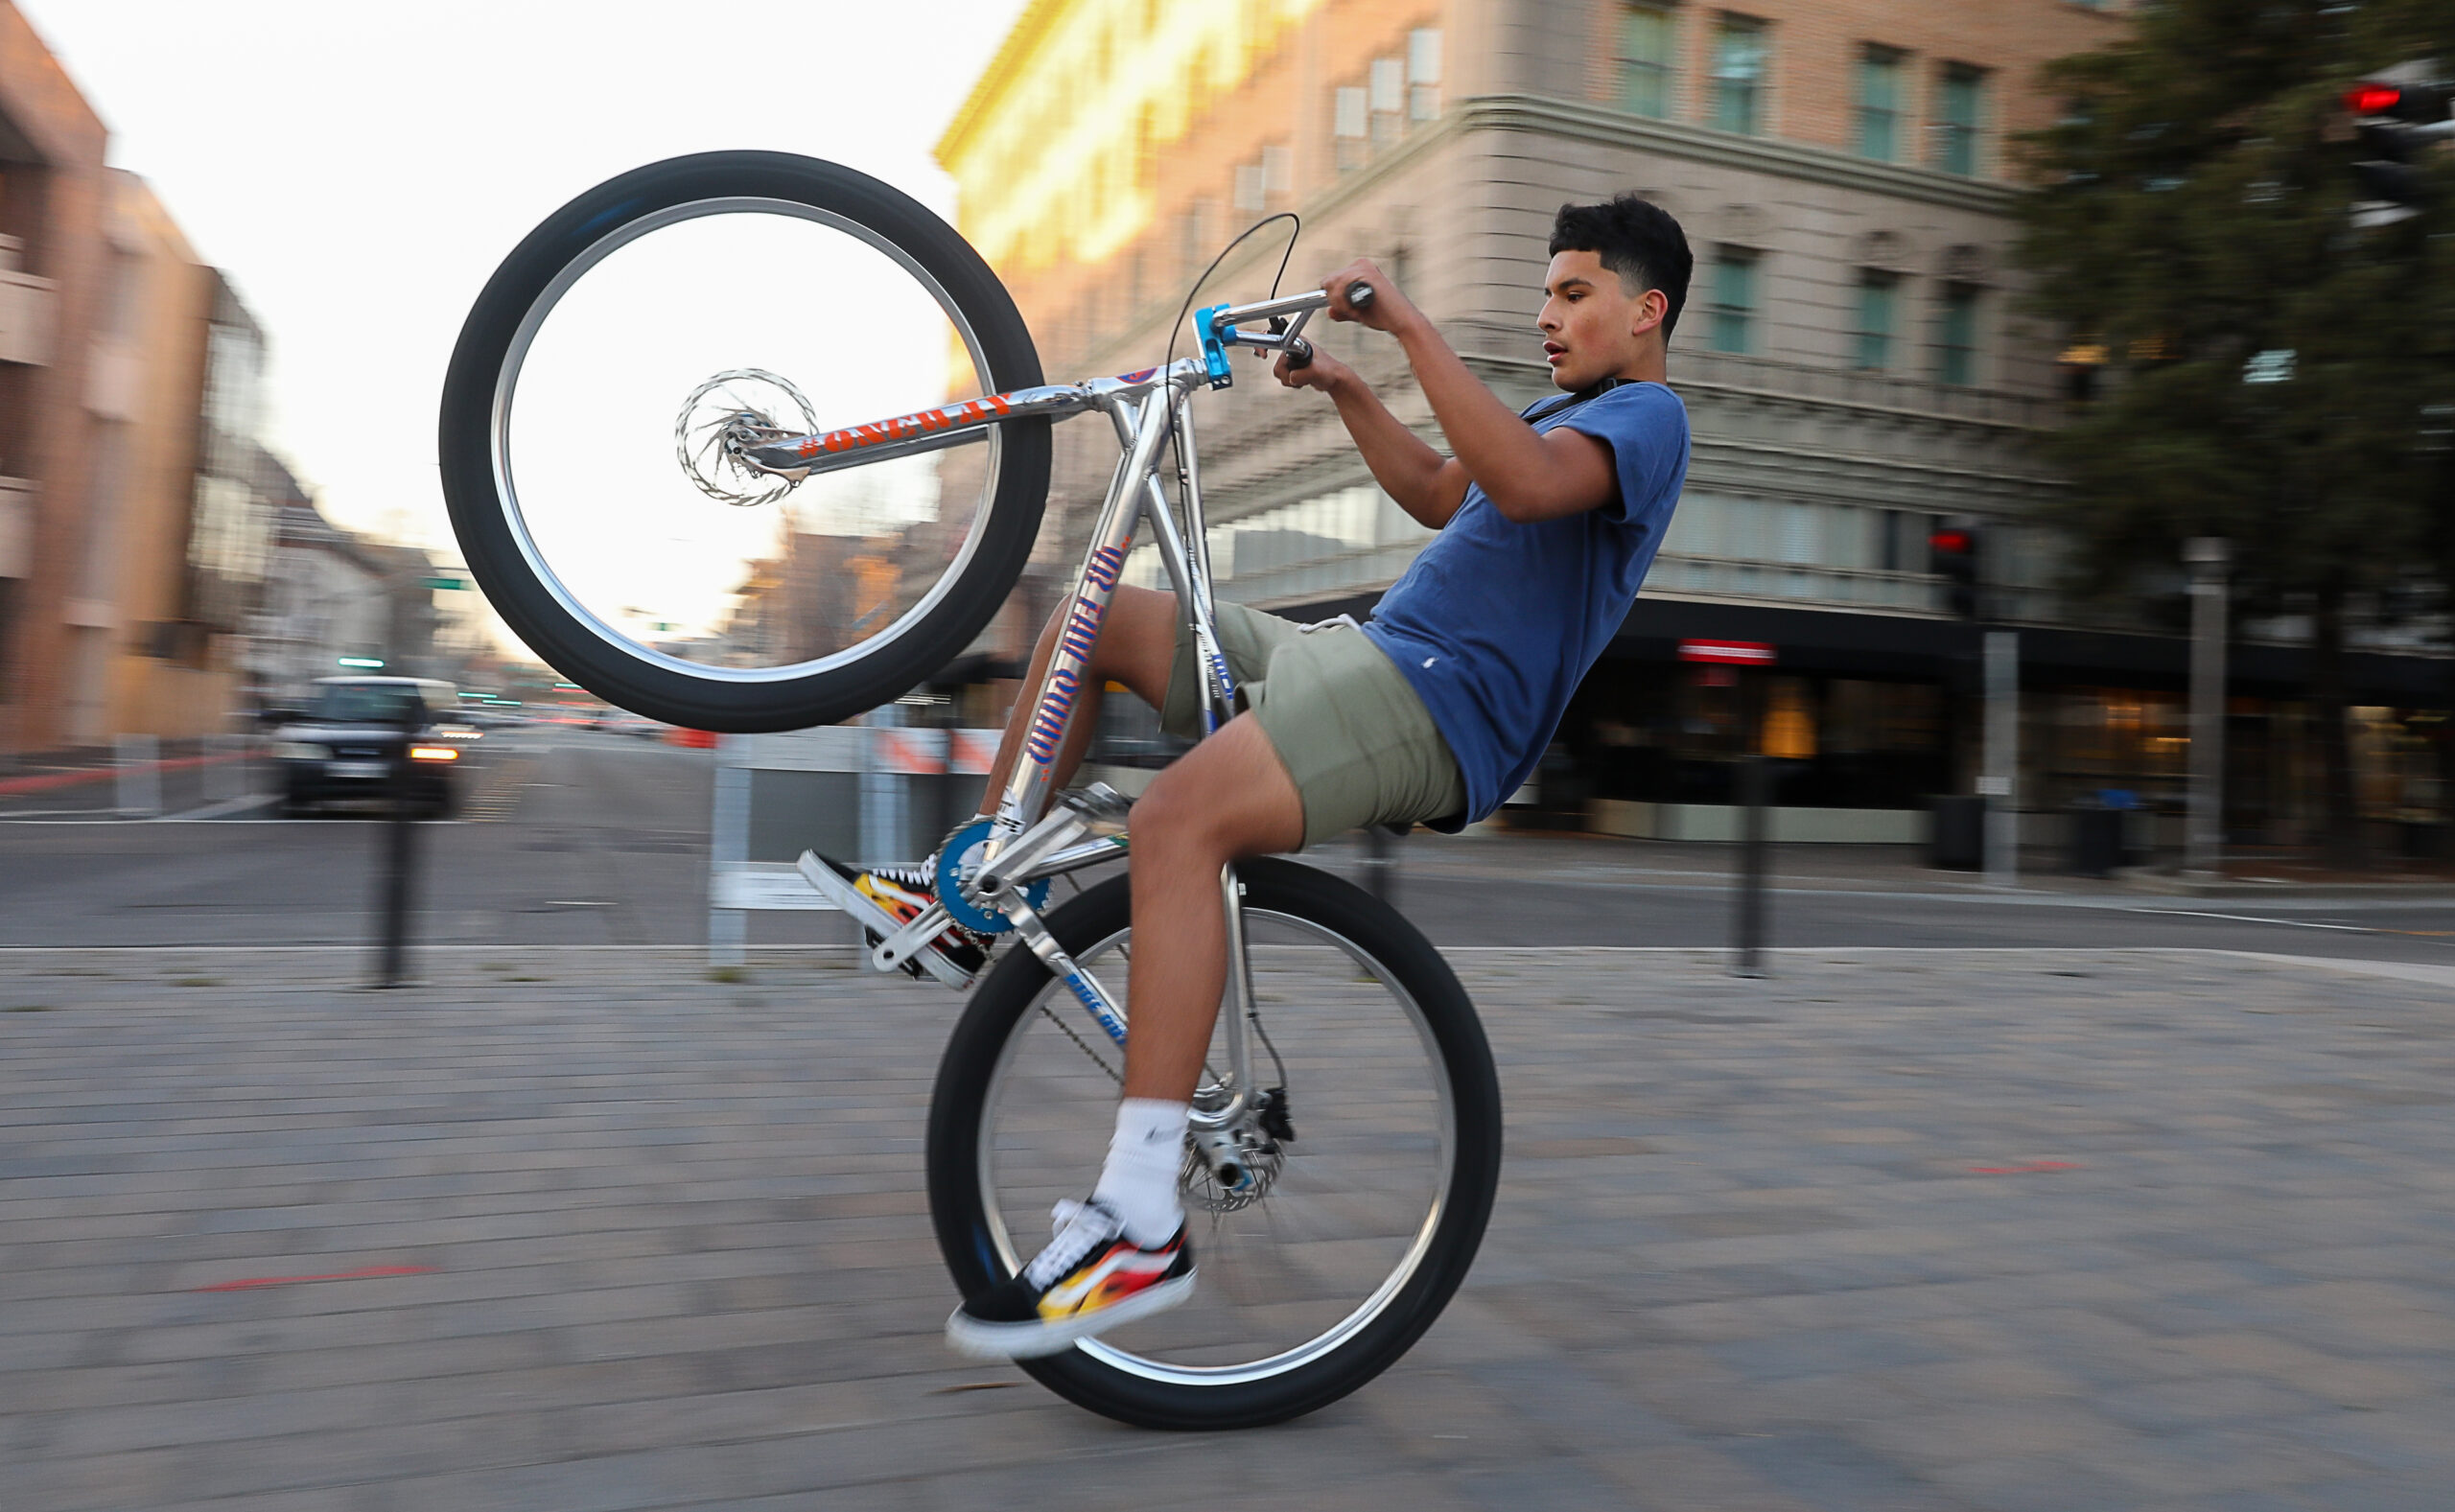 Alex Rodriquez performs a wheelie on his bike while riding around with his friends at Old Courthouse Square in Santa Rosa on Thursday, March 4, 2021. (Christopher Chung/ The Press Democrat)